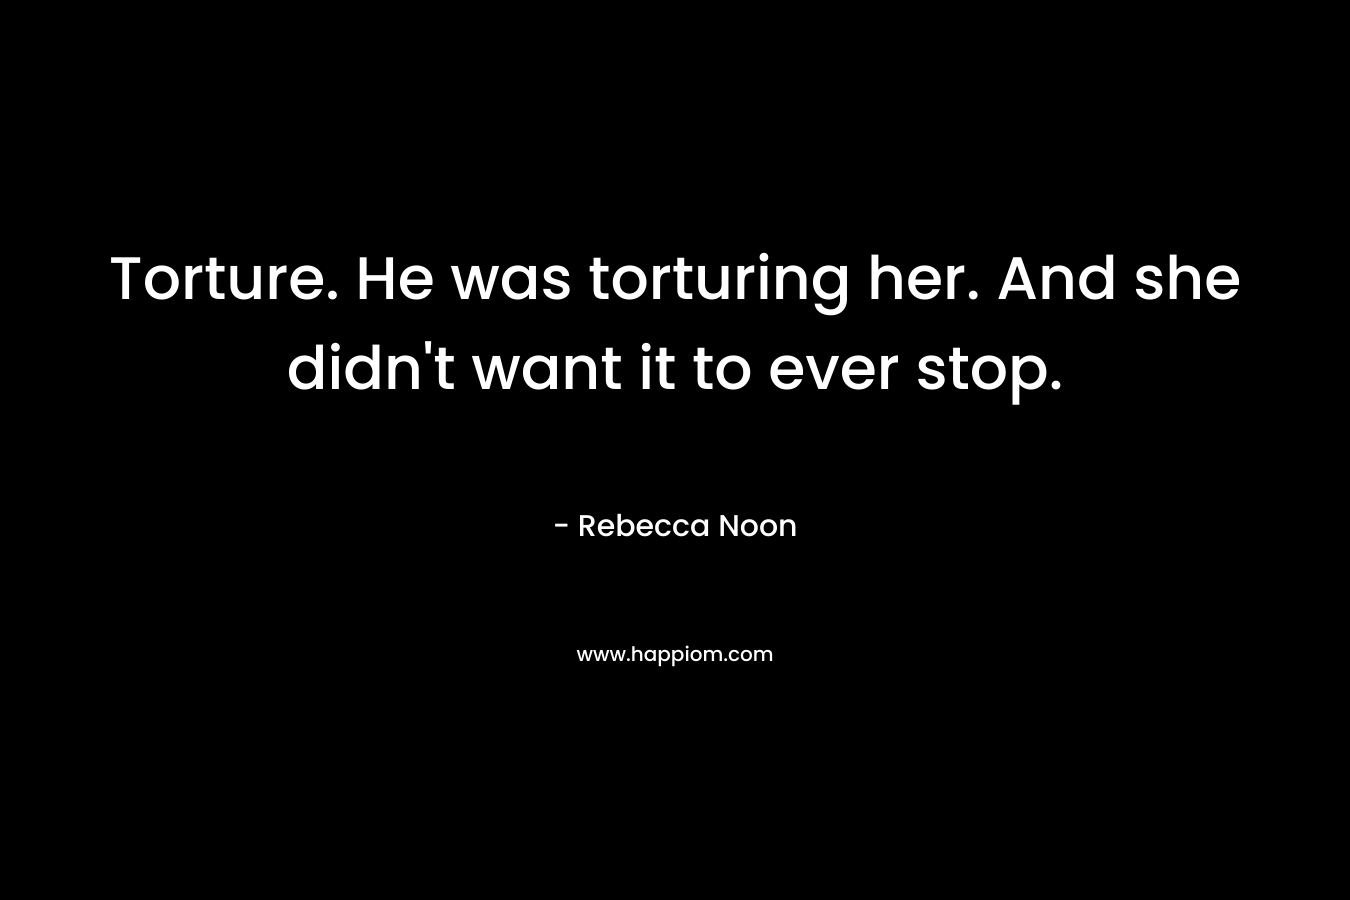 Torture. He was torturing her. And she didn't want it to ever stop.